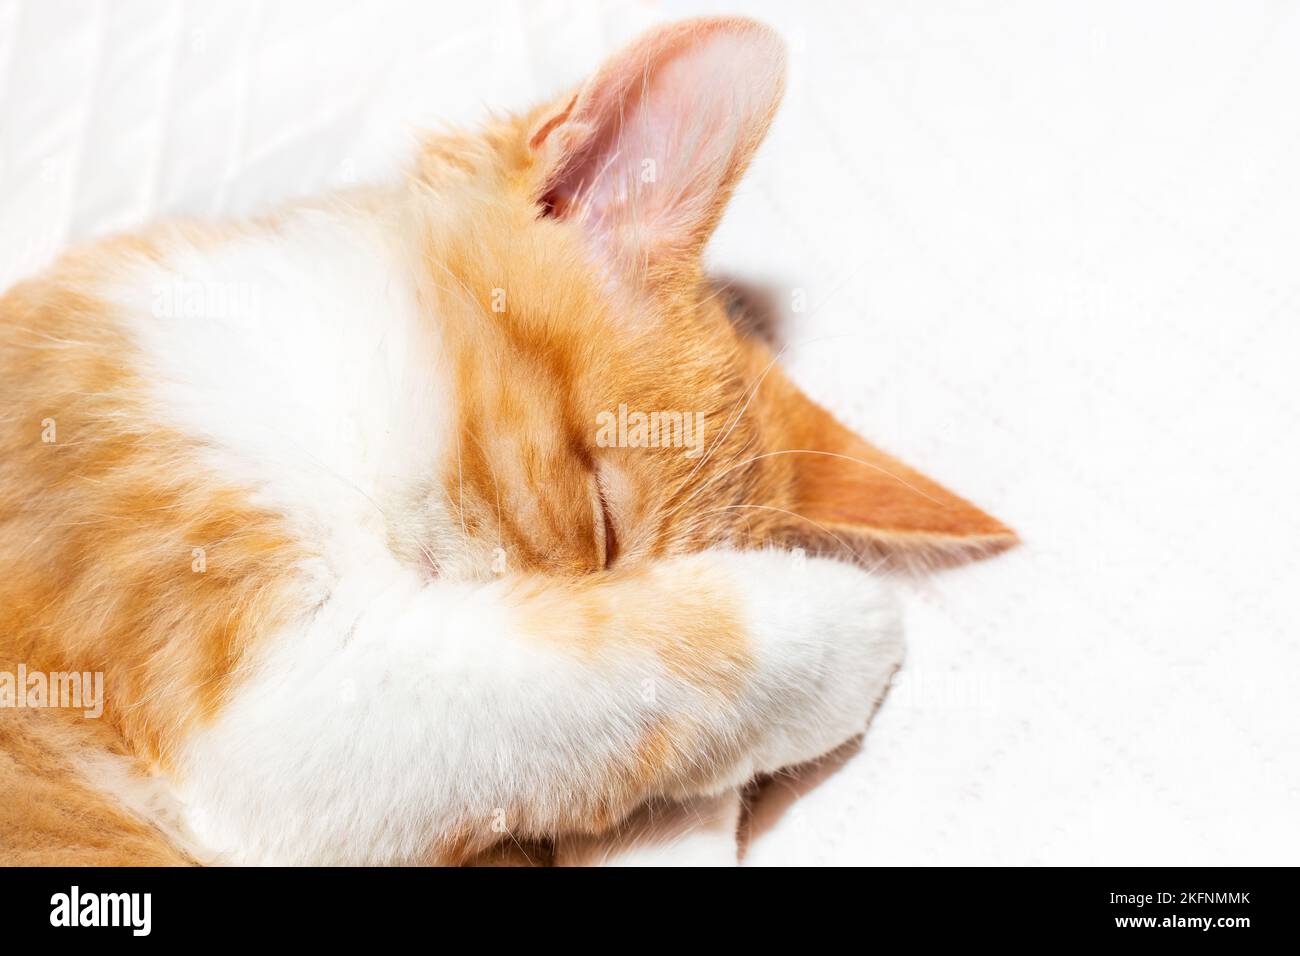 small red kitten sleeps on a white blanket, covering its muzzle with its paw. Close-up. Stock Photo